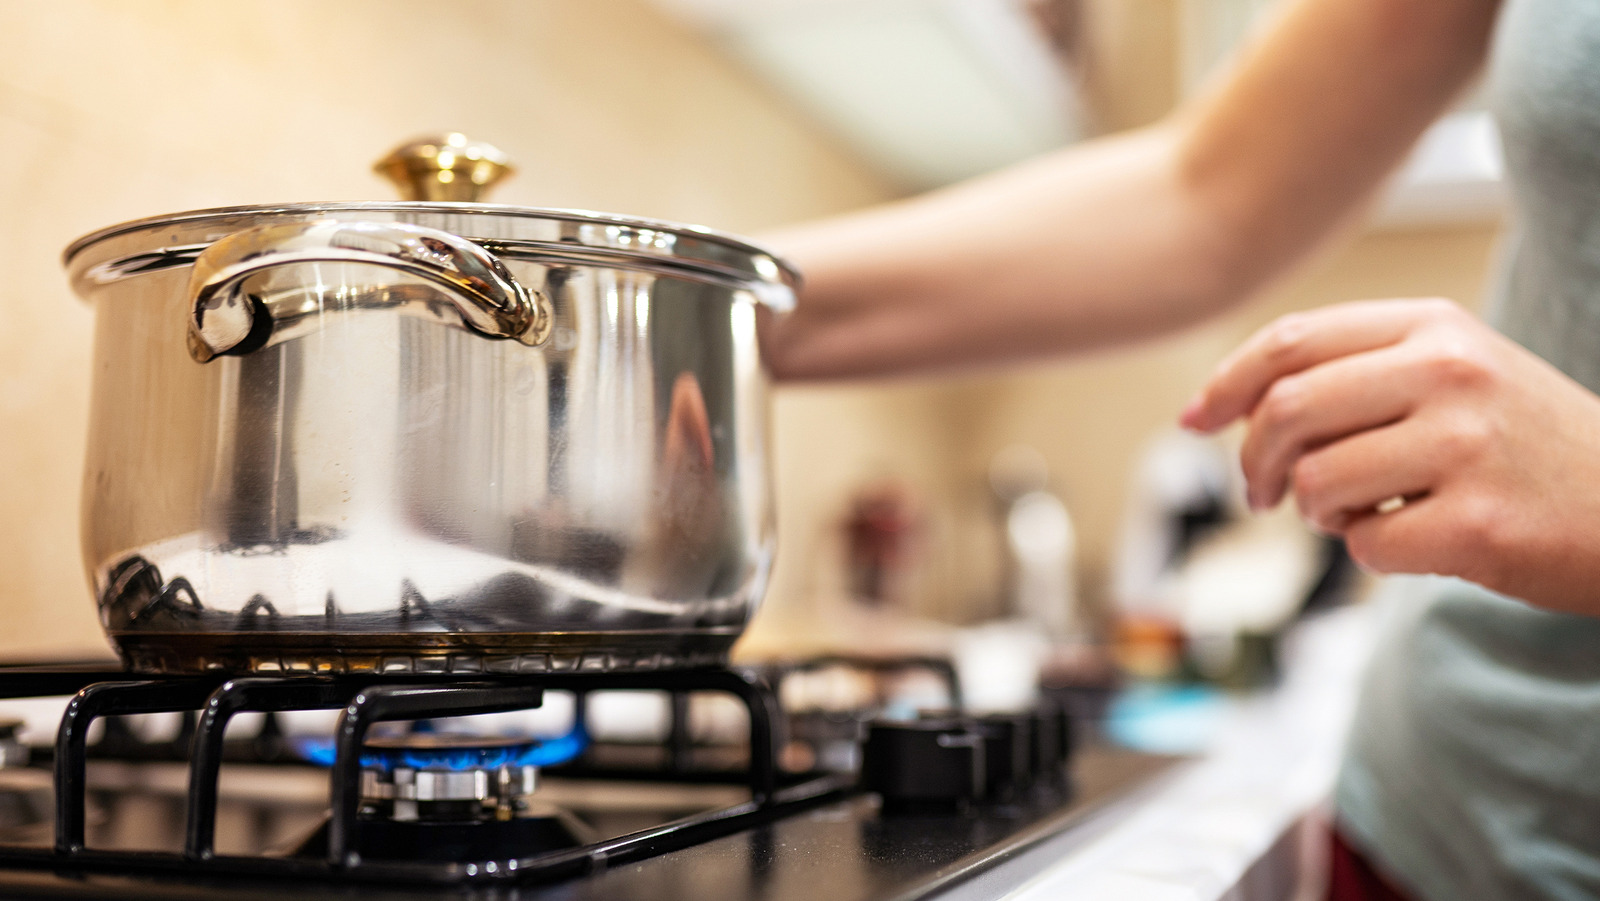 Should You Cover a Pot While You Cook?